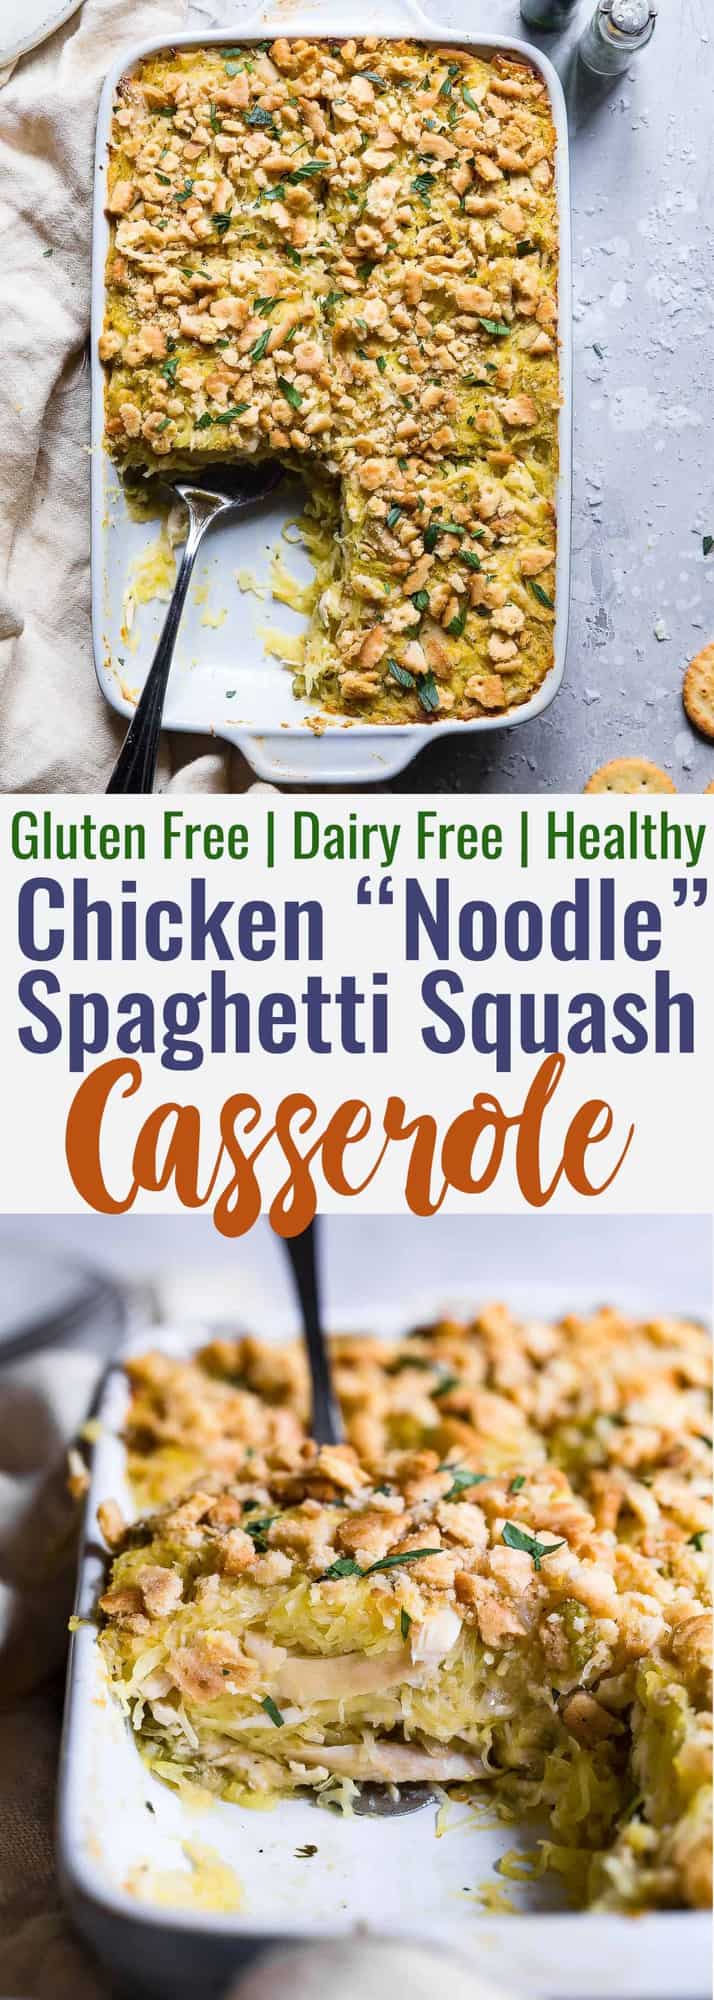 Healthy Chicken "Noodle" Spaghetti Squash Casserole - This Healthy Chicken Noodle Casserole uses spaghetti squash so it's gluten free and dairy free! Homemade condensed chicken soup makes it SO creamy! The best healthy comfort food! | #Foodfaithfitness | #Glutenfree #Healthy #Dairyfree #Spaghettisquash #Casserole